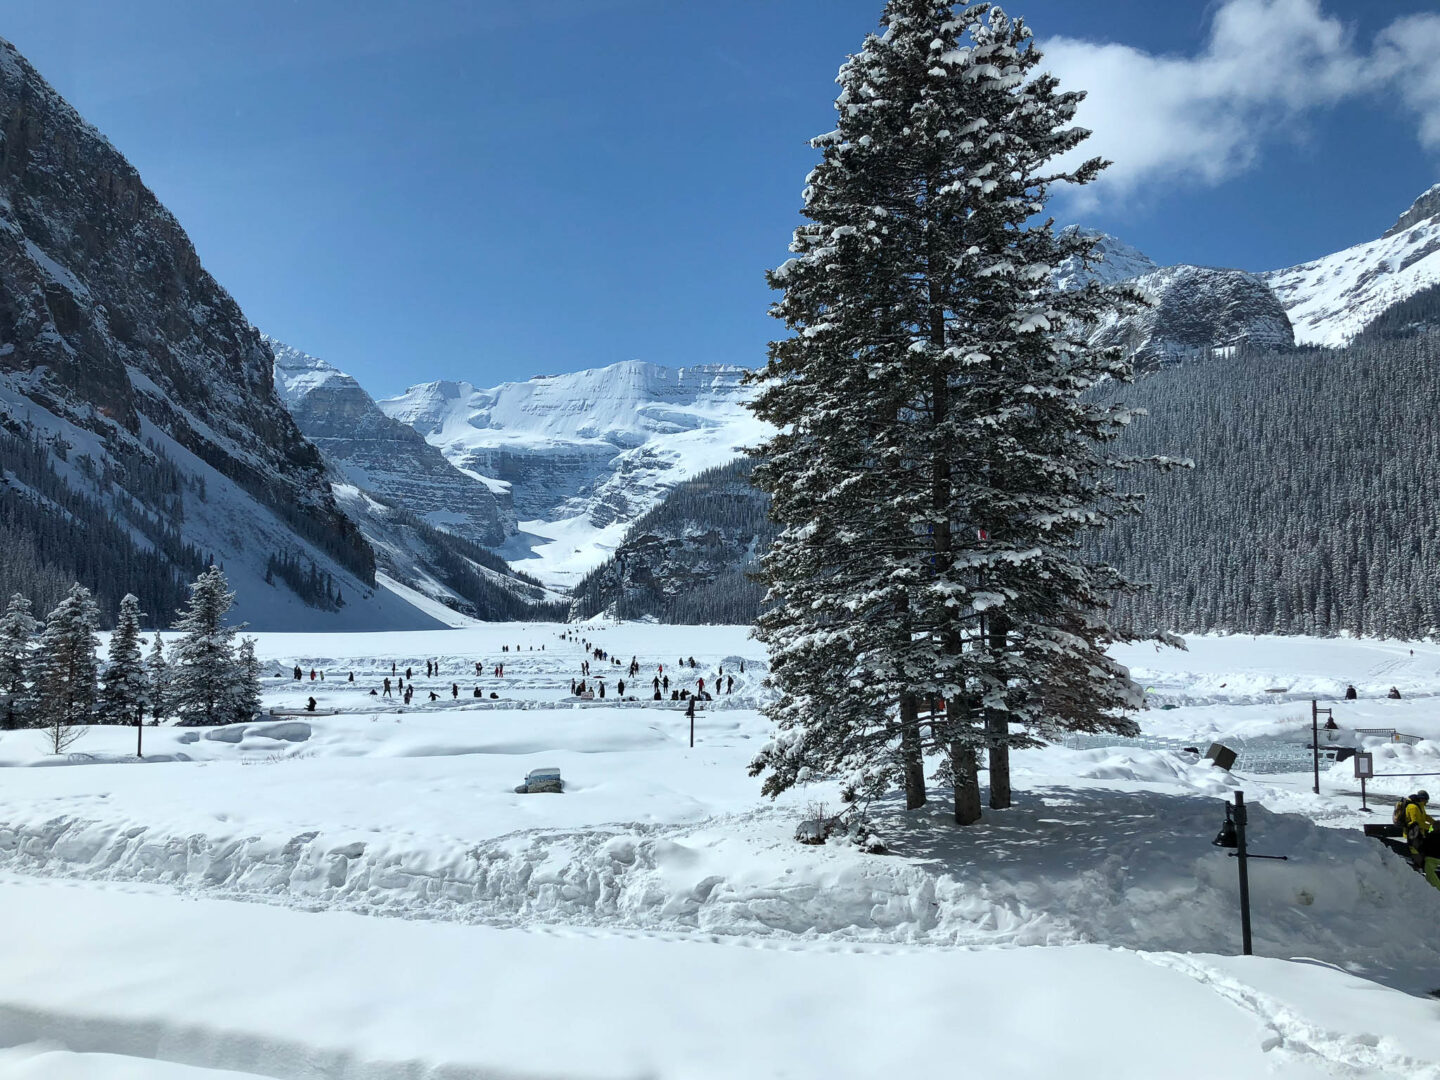 An unforgettable winter's day in Lake Louise, Canada